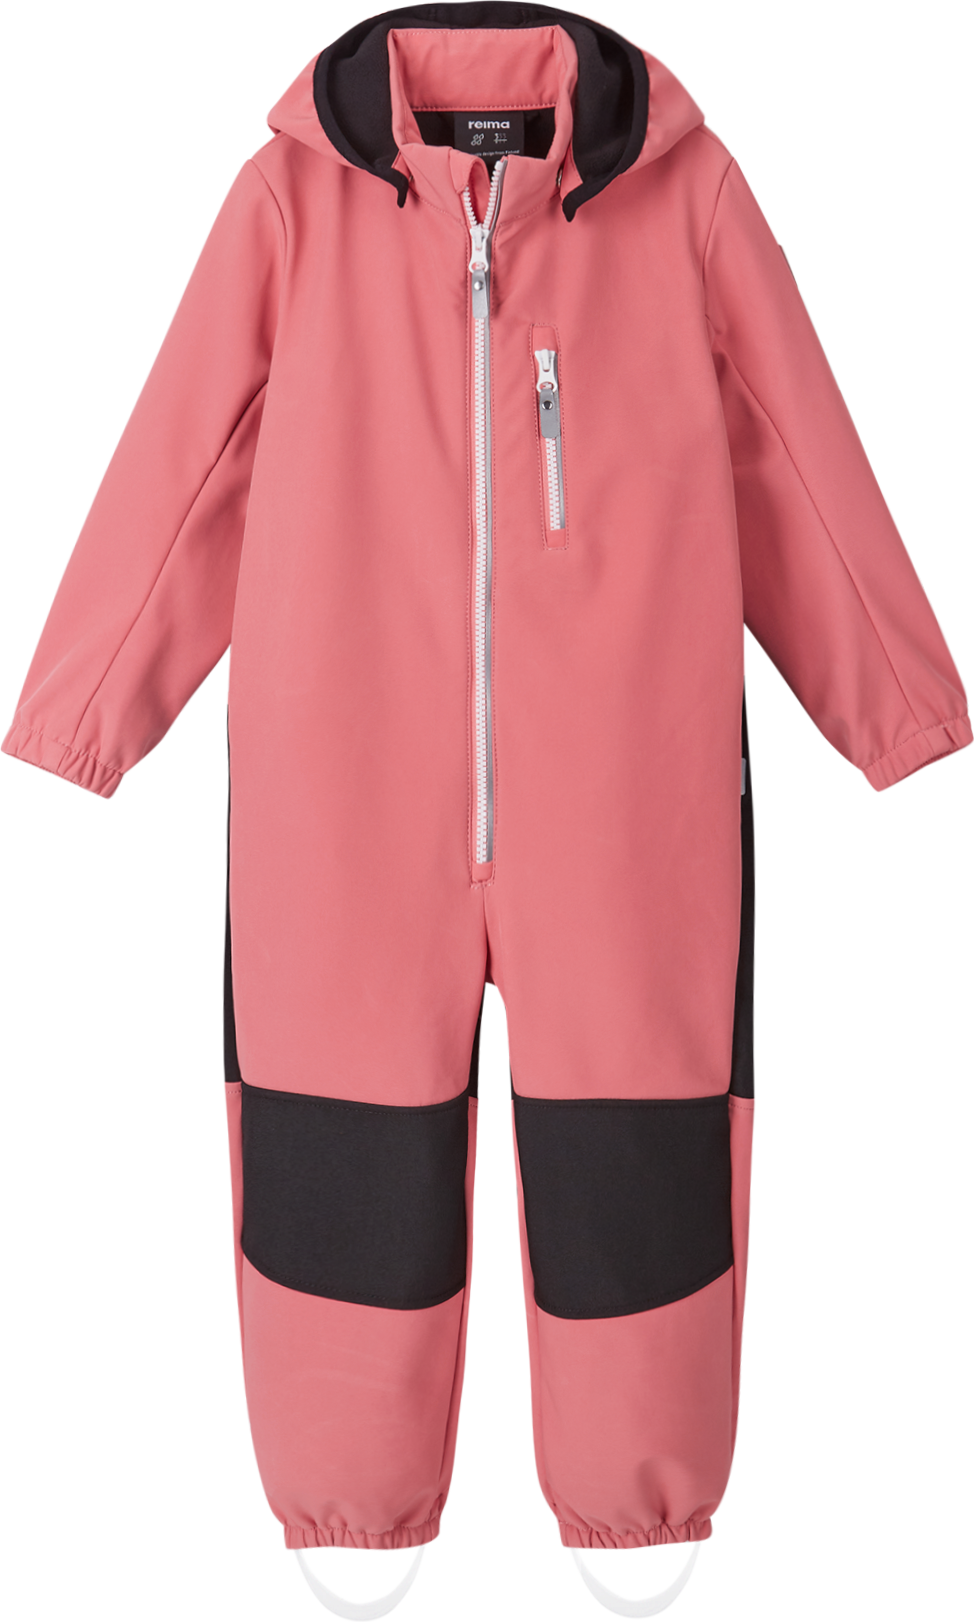 Kids’ Softshell Overall Nurmes Pink coral 4230